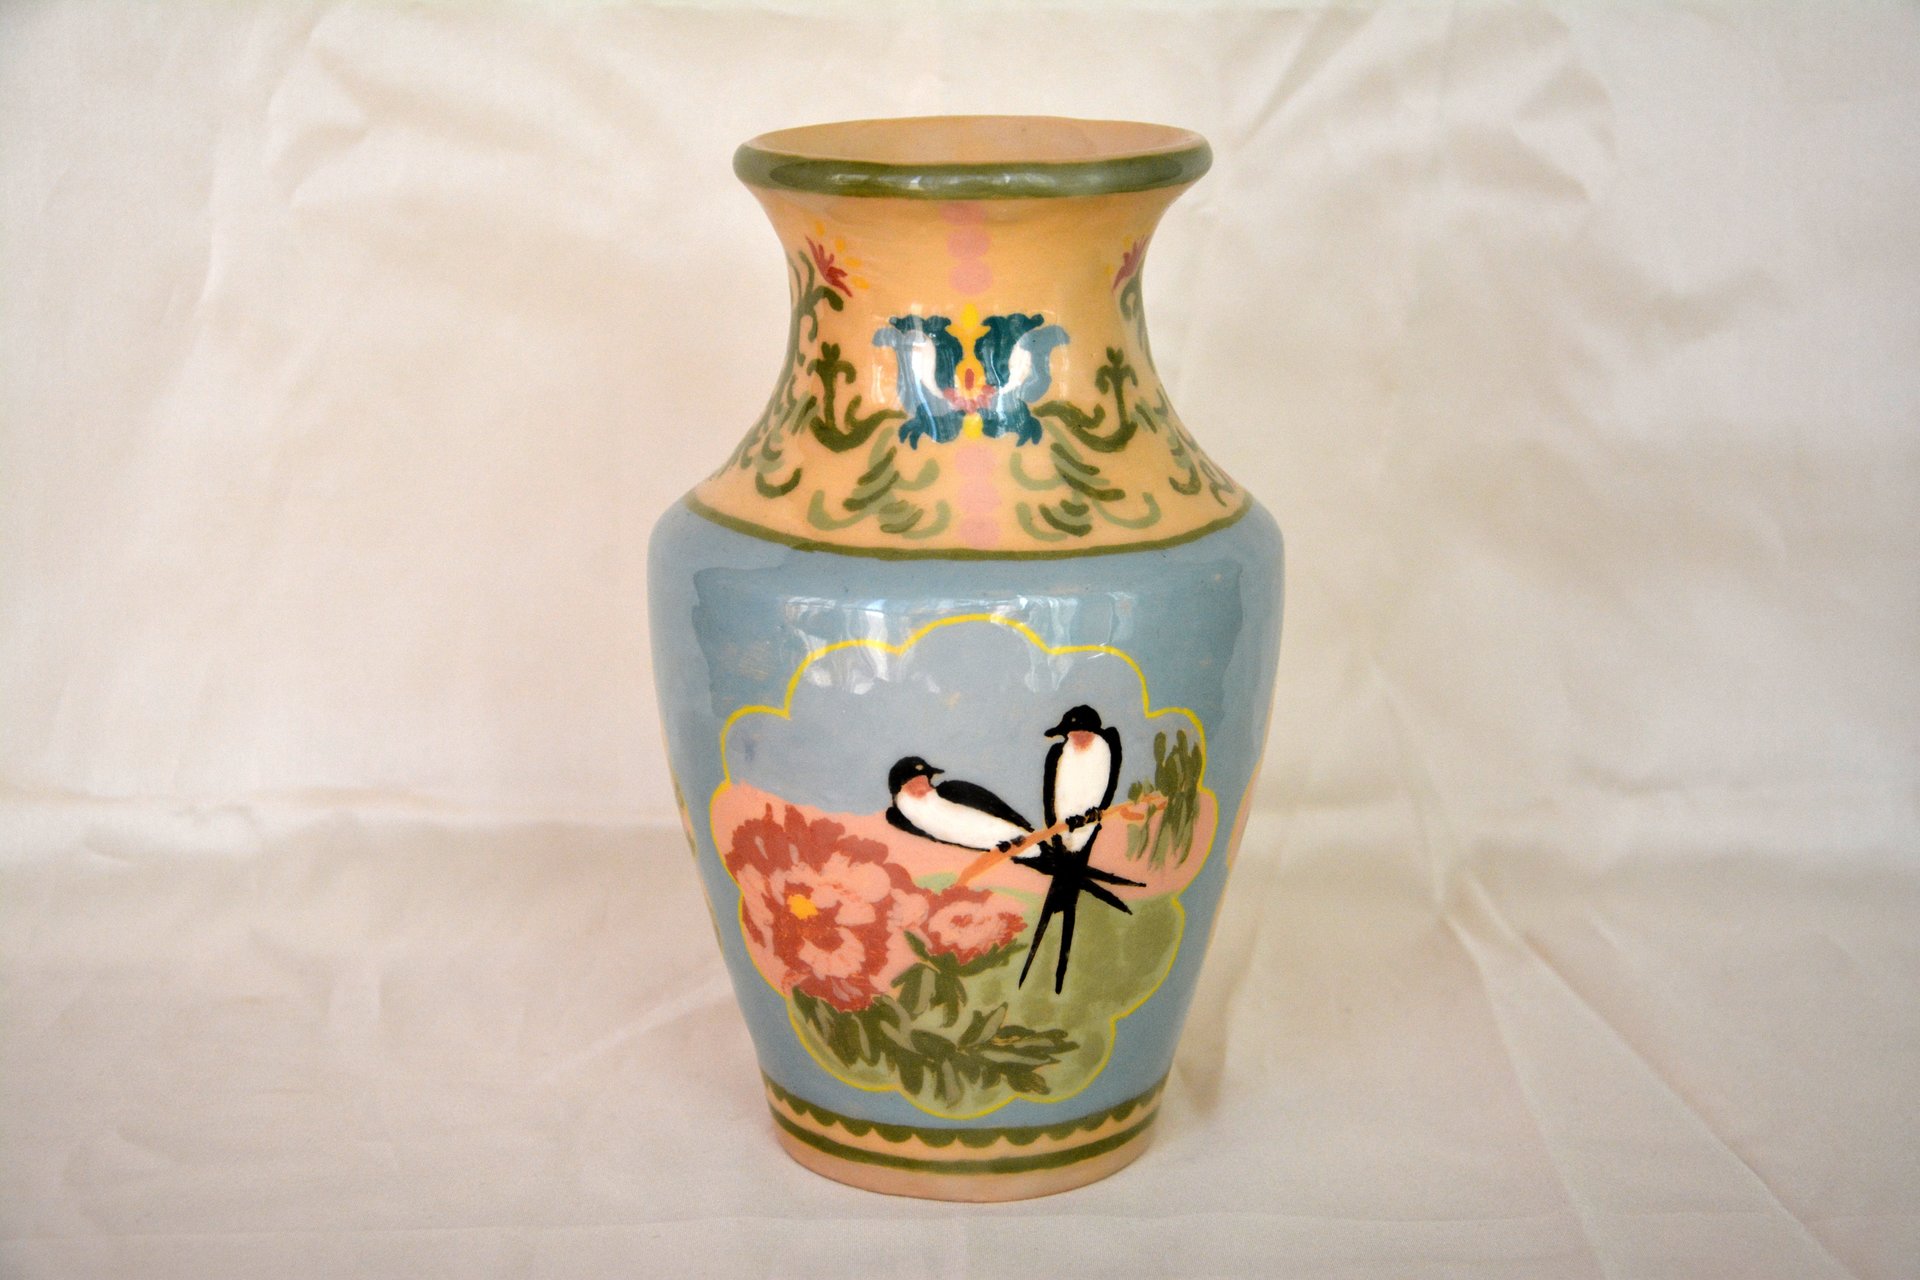 Ceramic classic vase with hand-painted swallows, height  - 18 cm, photo 3 of 5.